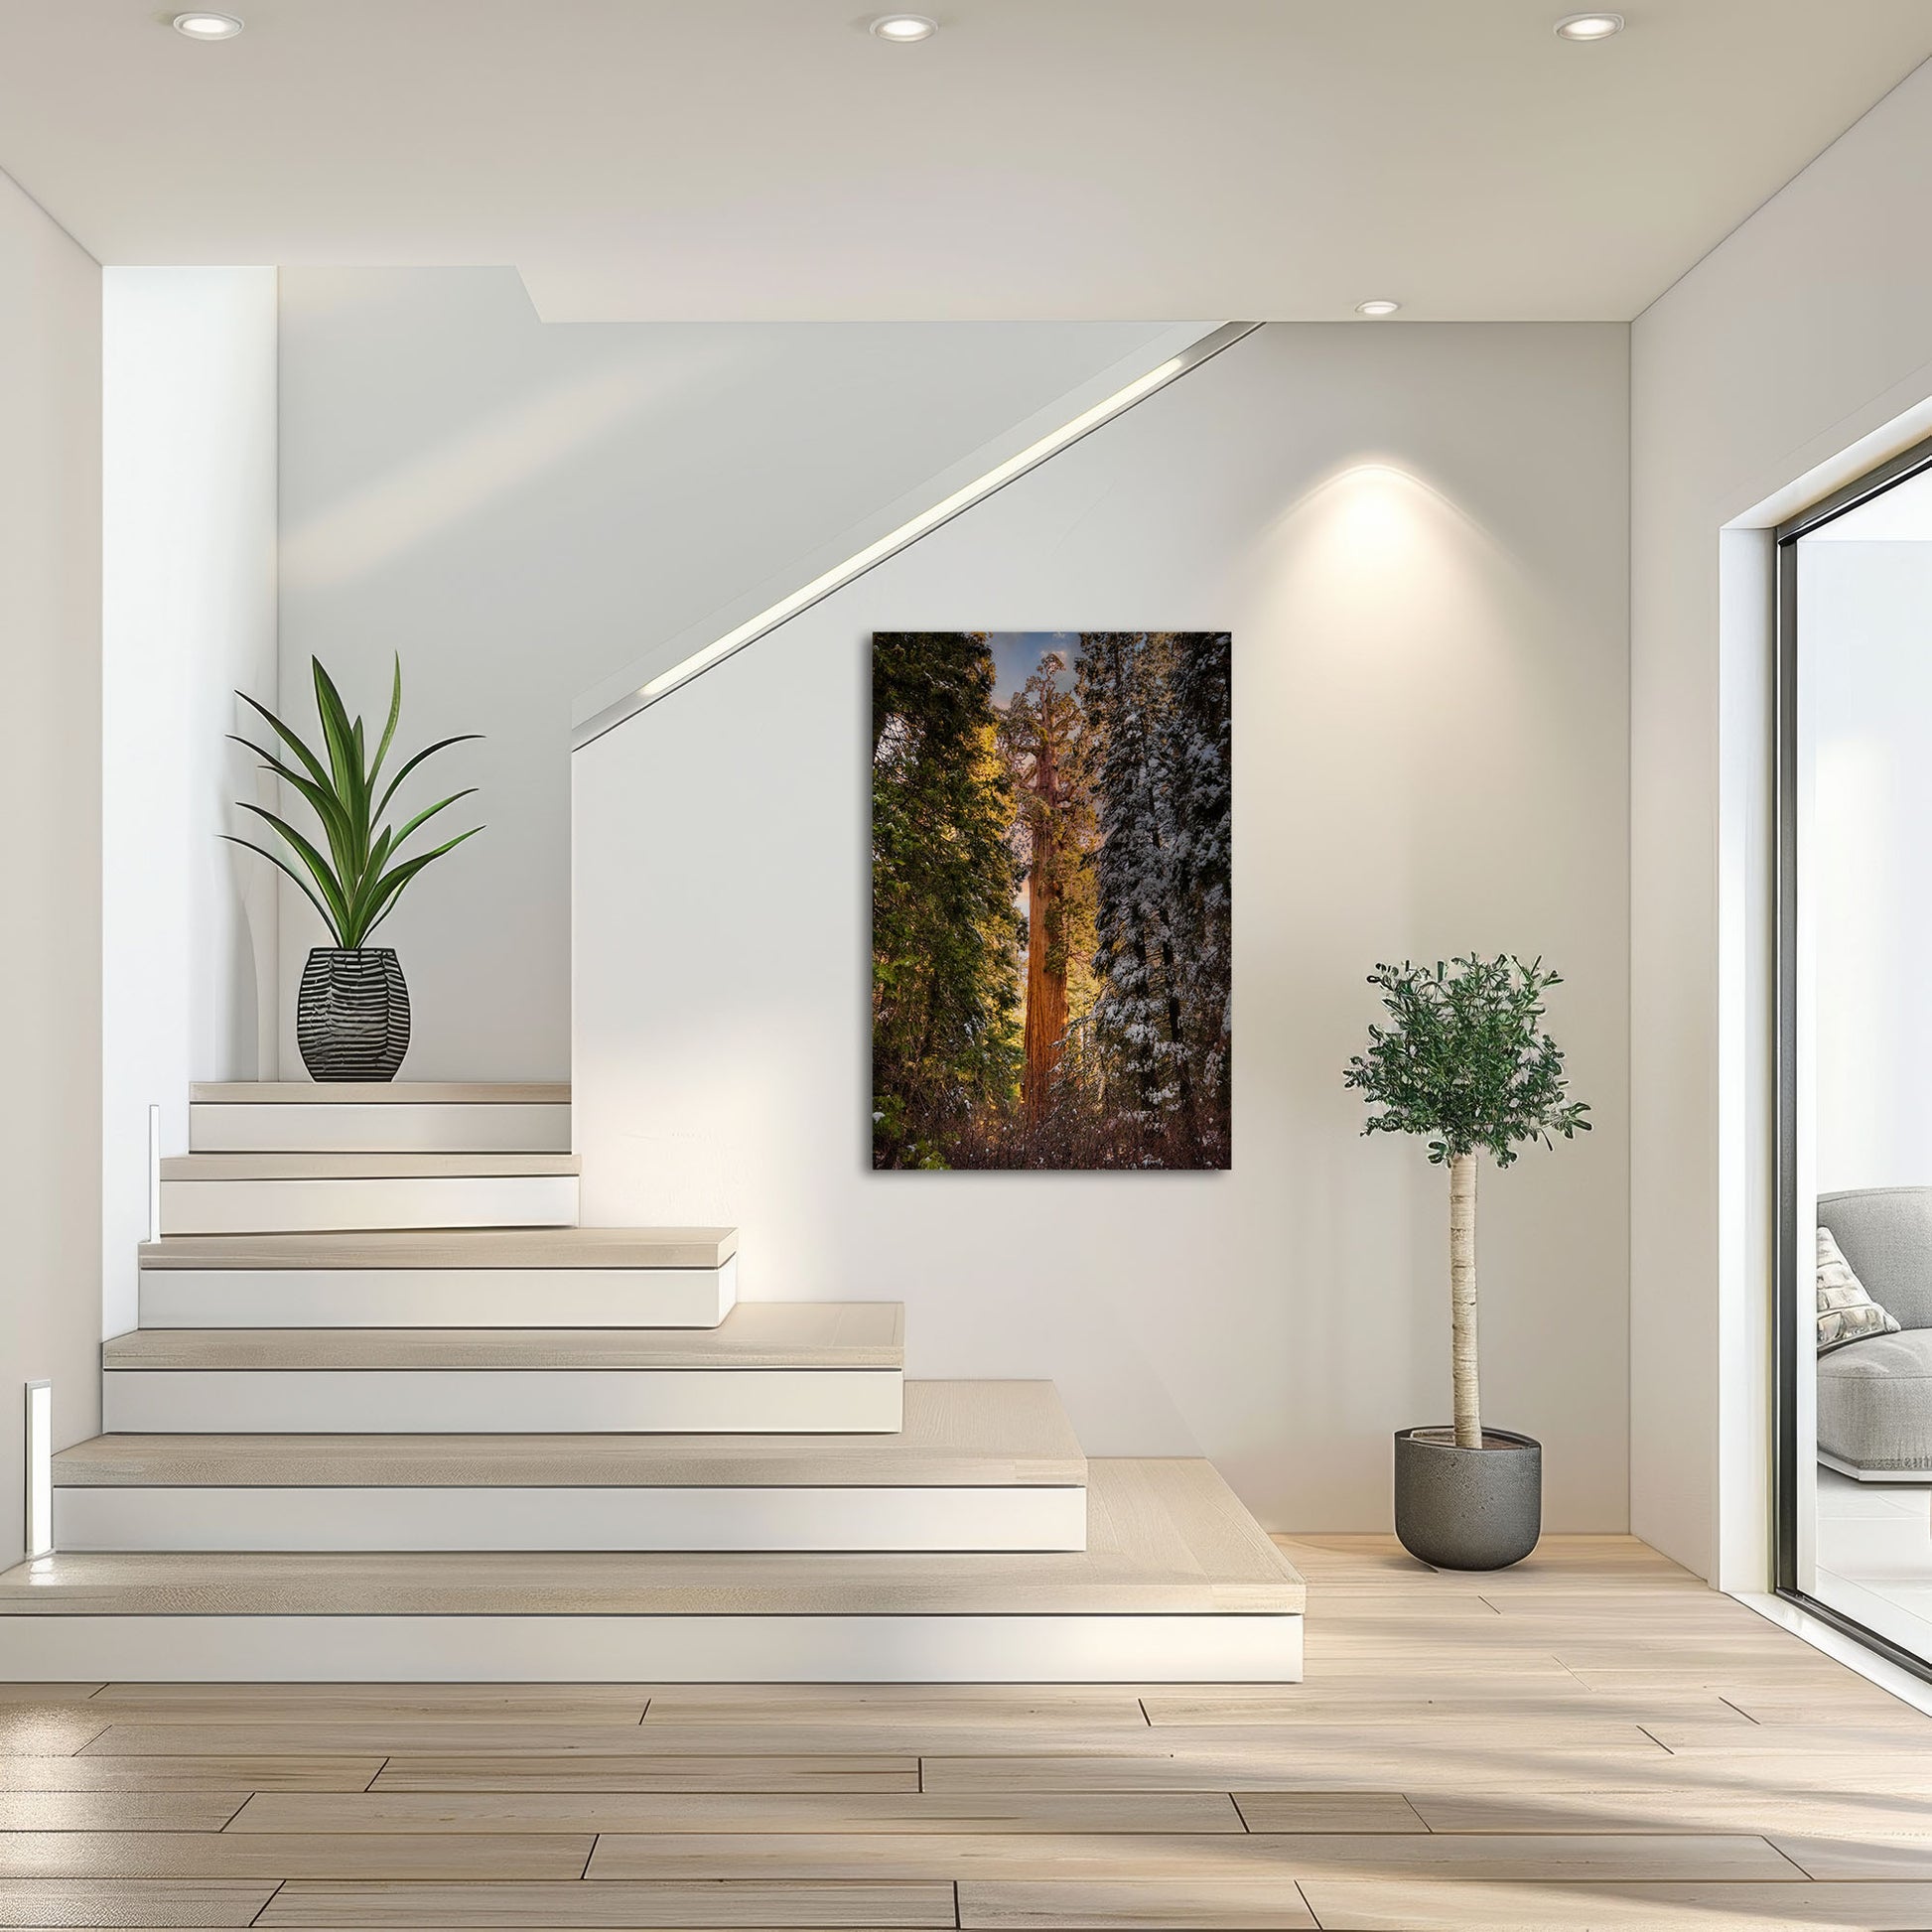 A canvas of the Giant Sequoia from Grant Grove adorns a bright stairwell, offering a lush green and earthy contrast to the modern, minimalist decor.